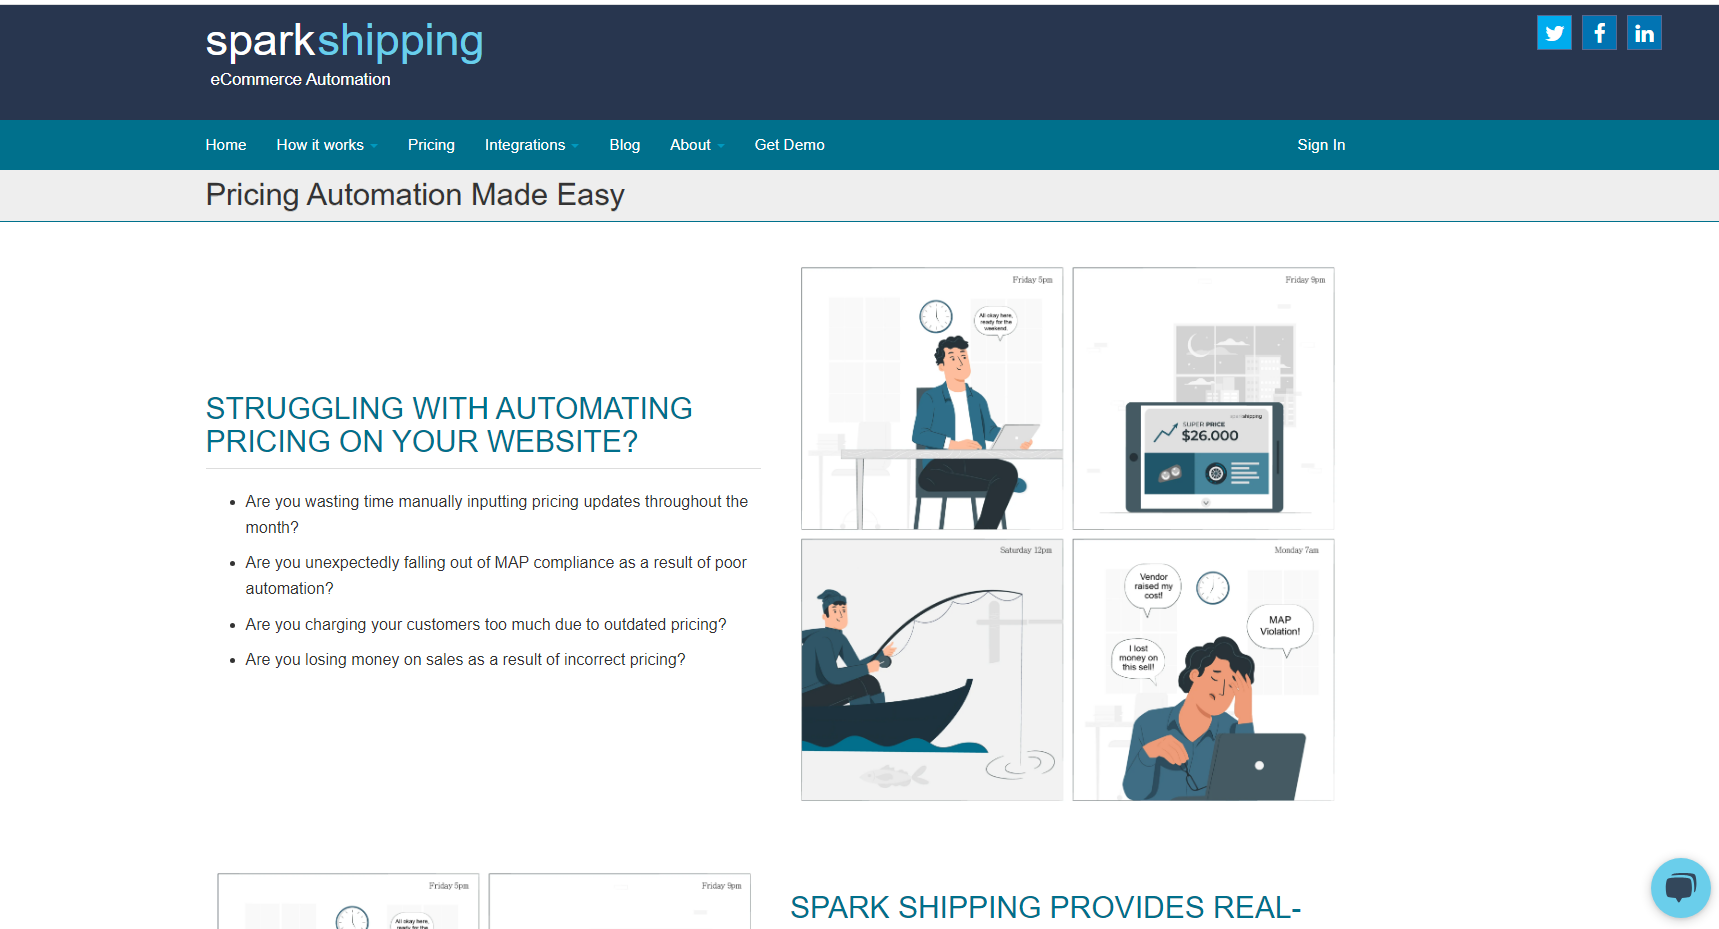 Spark Shipping pricing automation